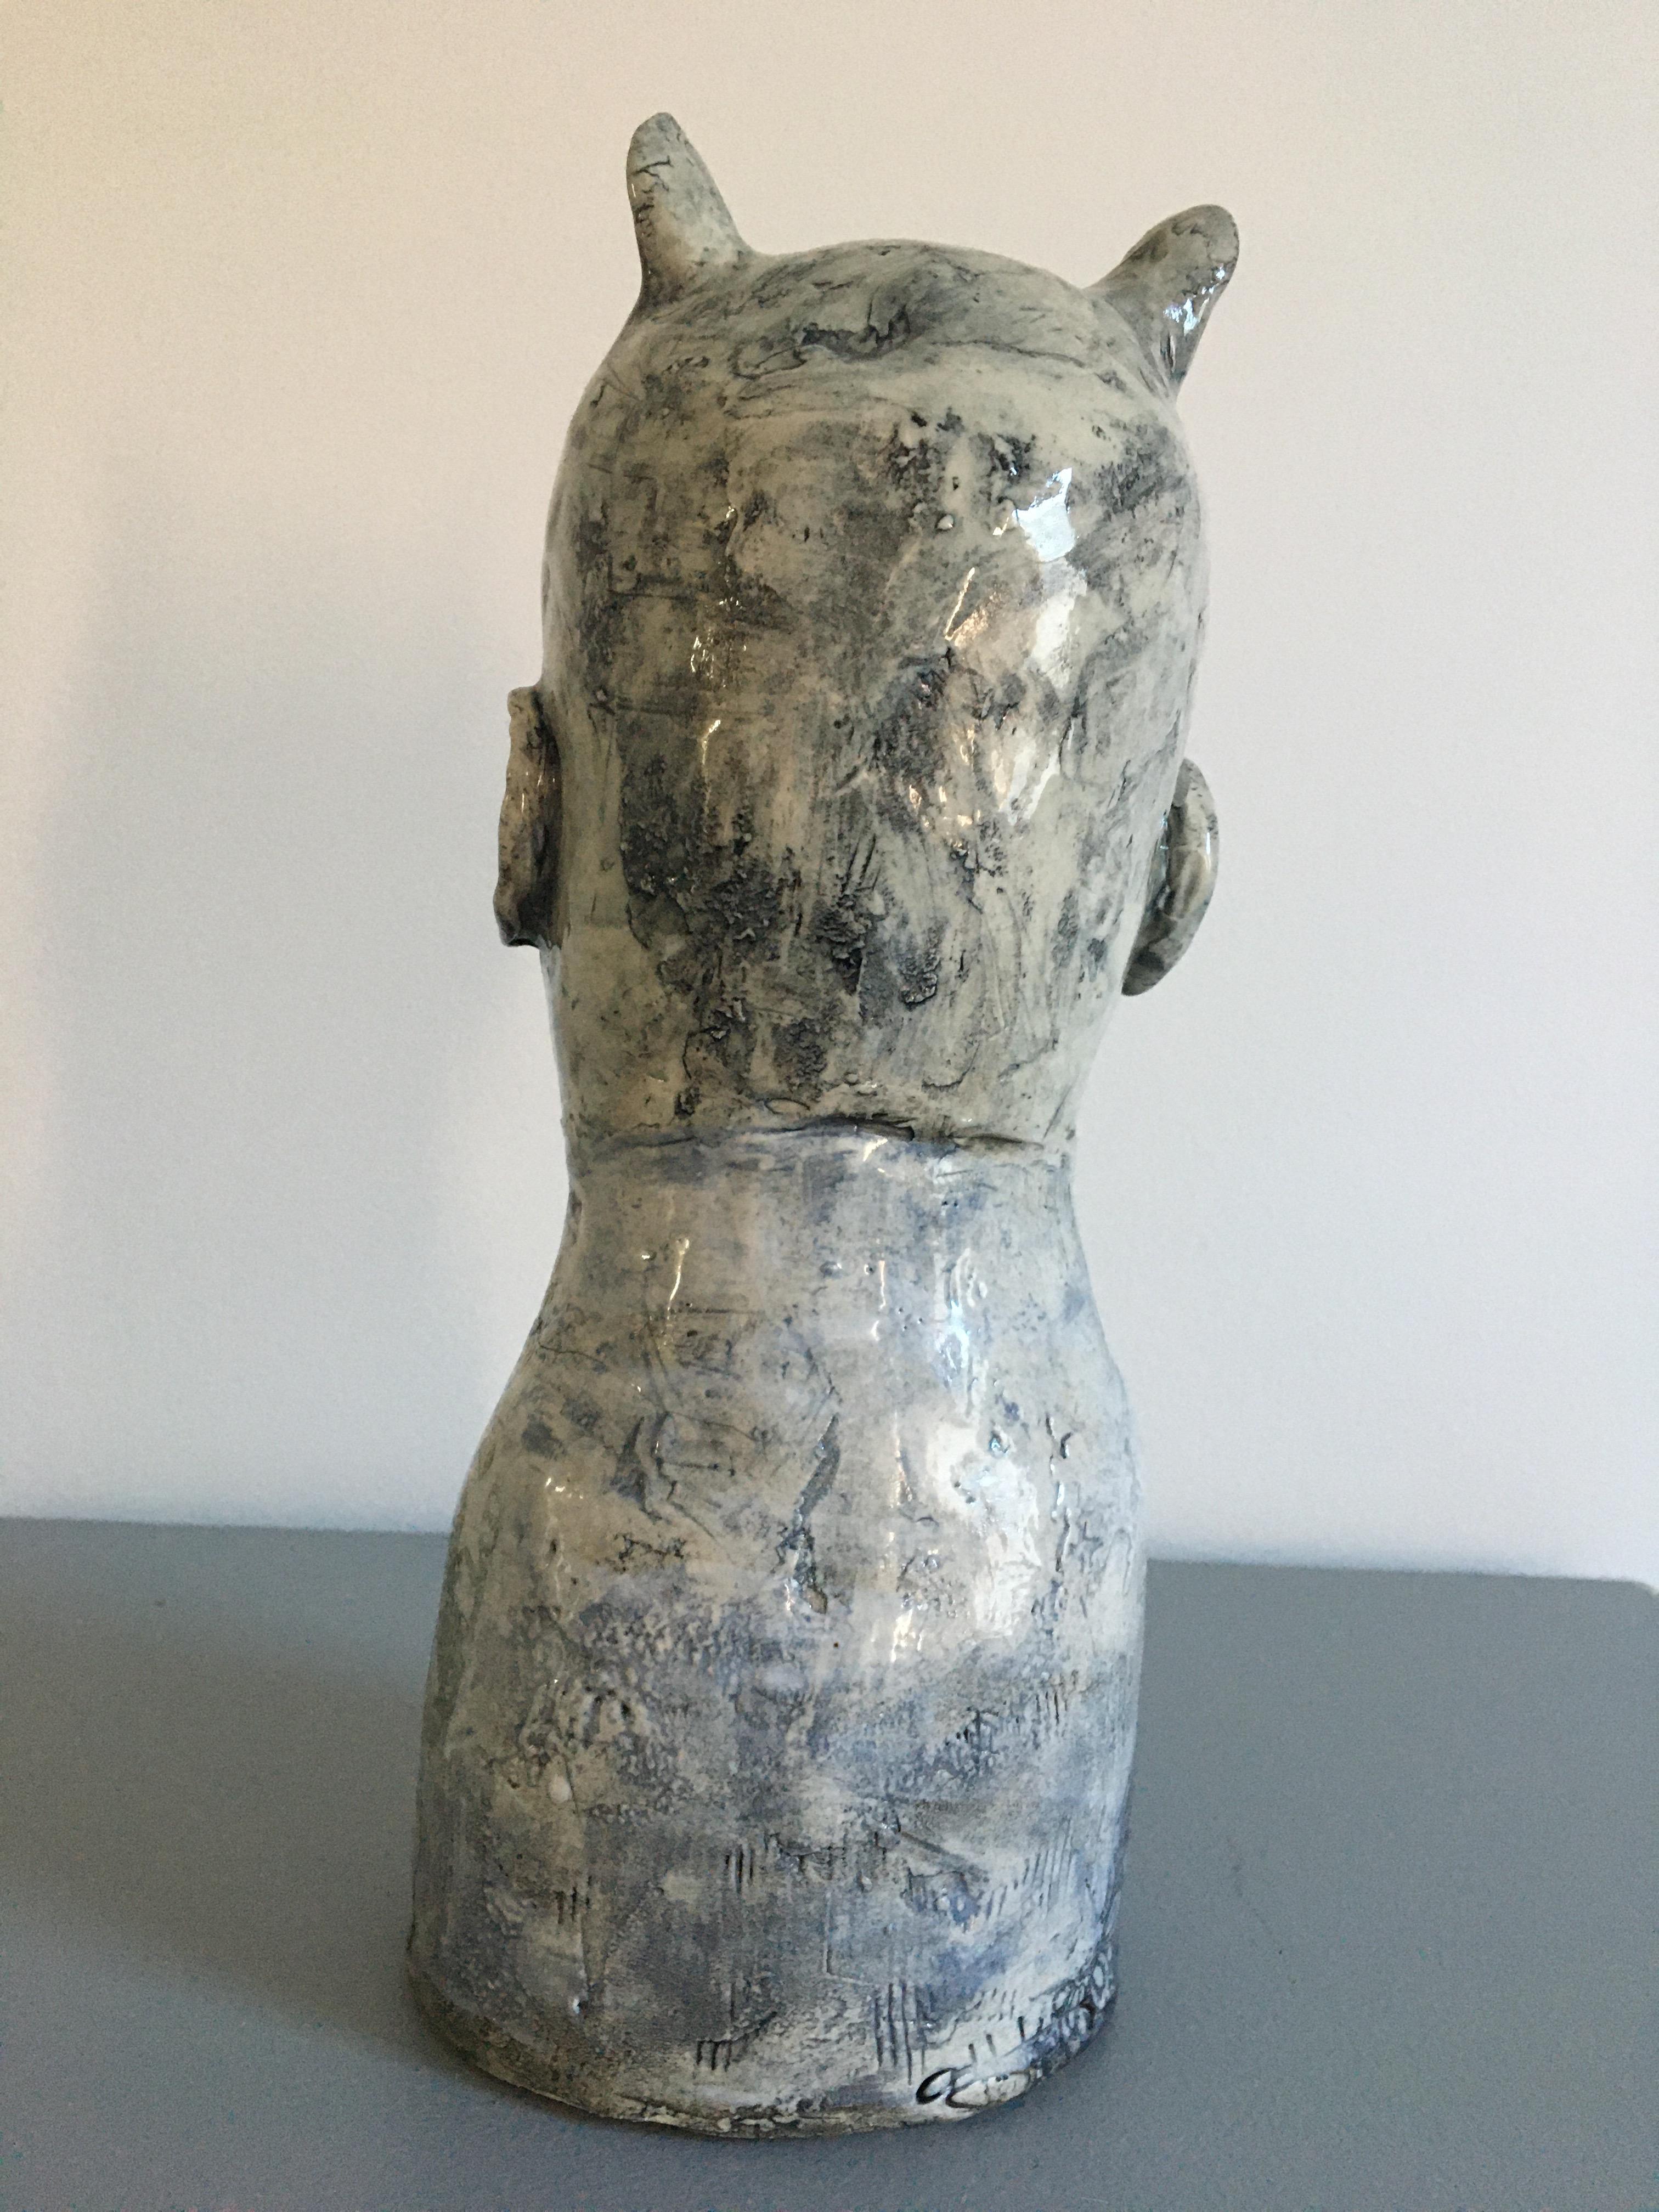 Ceramic Bunny Person: 'He wore it so no one would see him' - Contemporary Sculpture by Ashley Benton